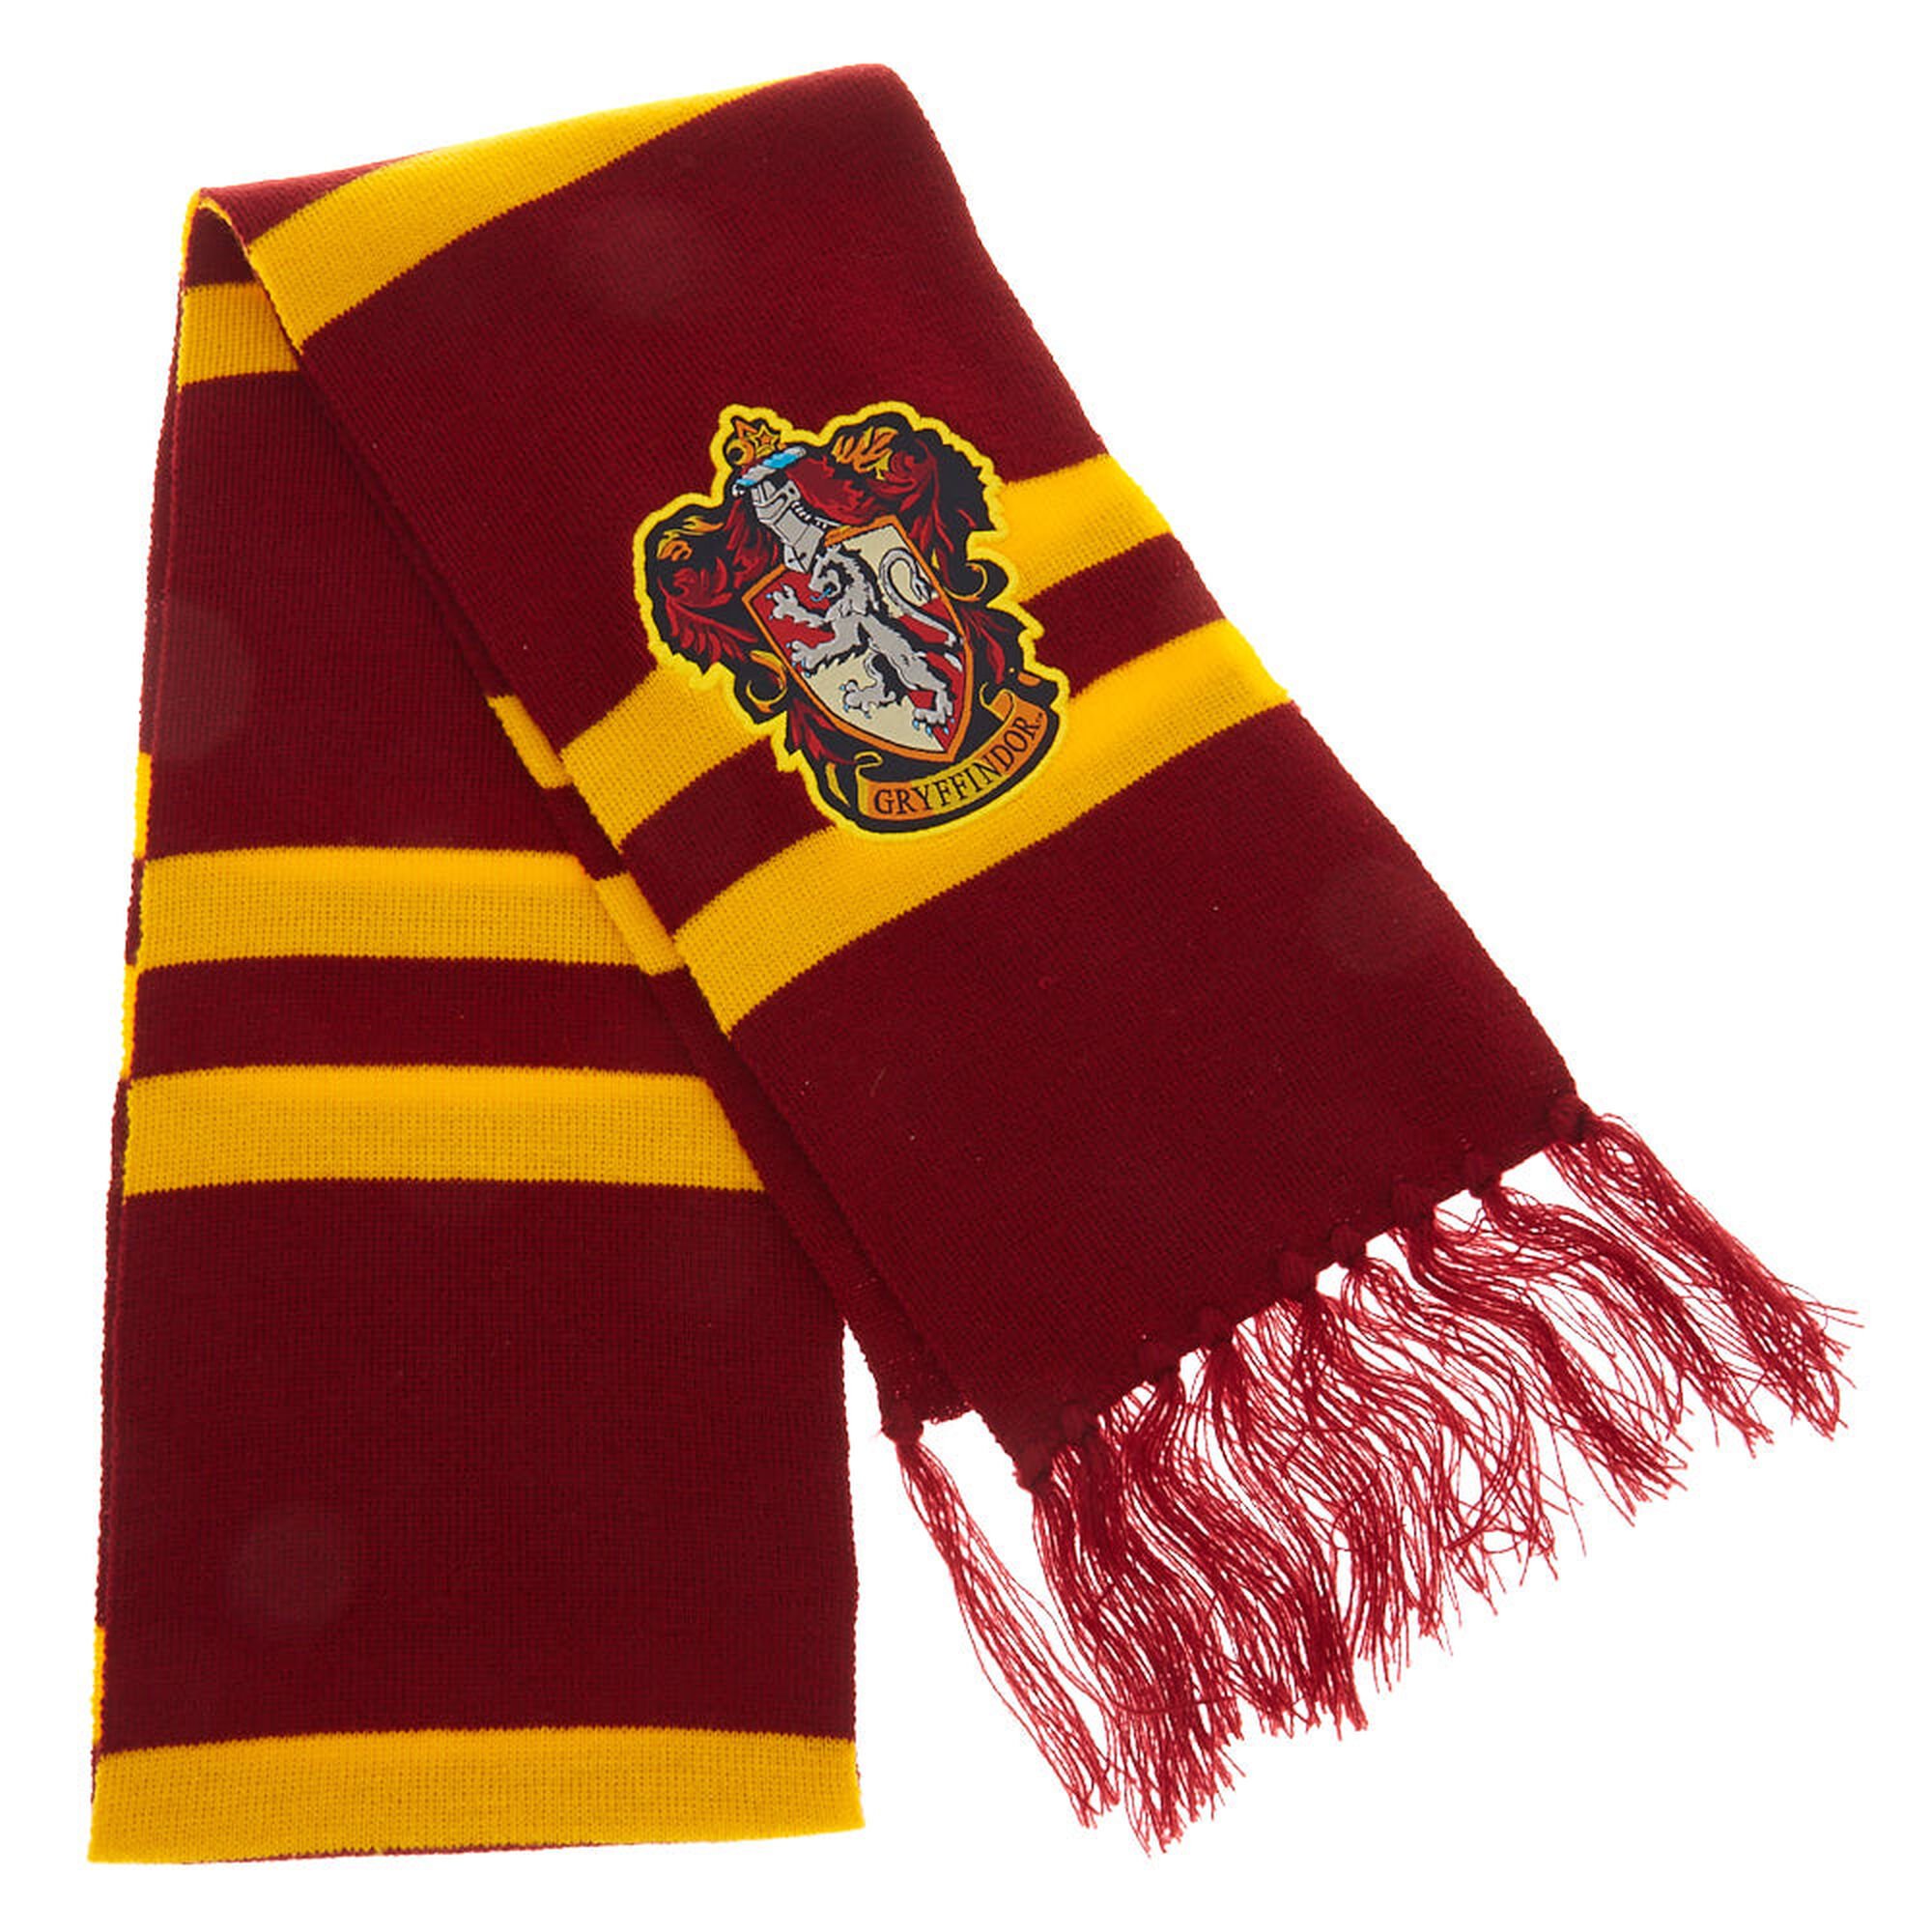 View Claires Harry Potter Gryffindor Scarf Red information